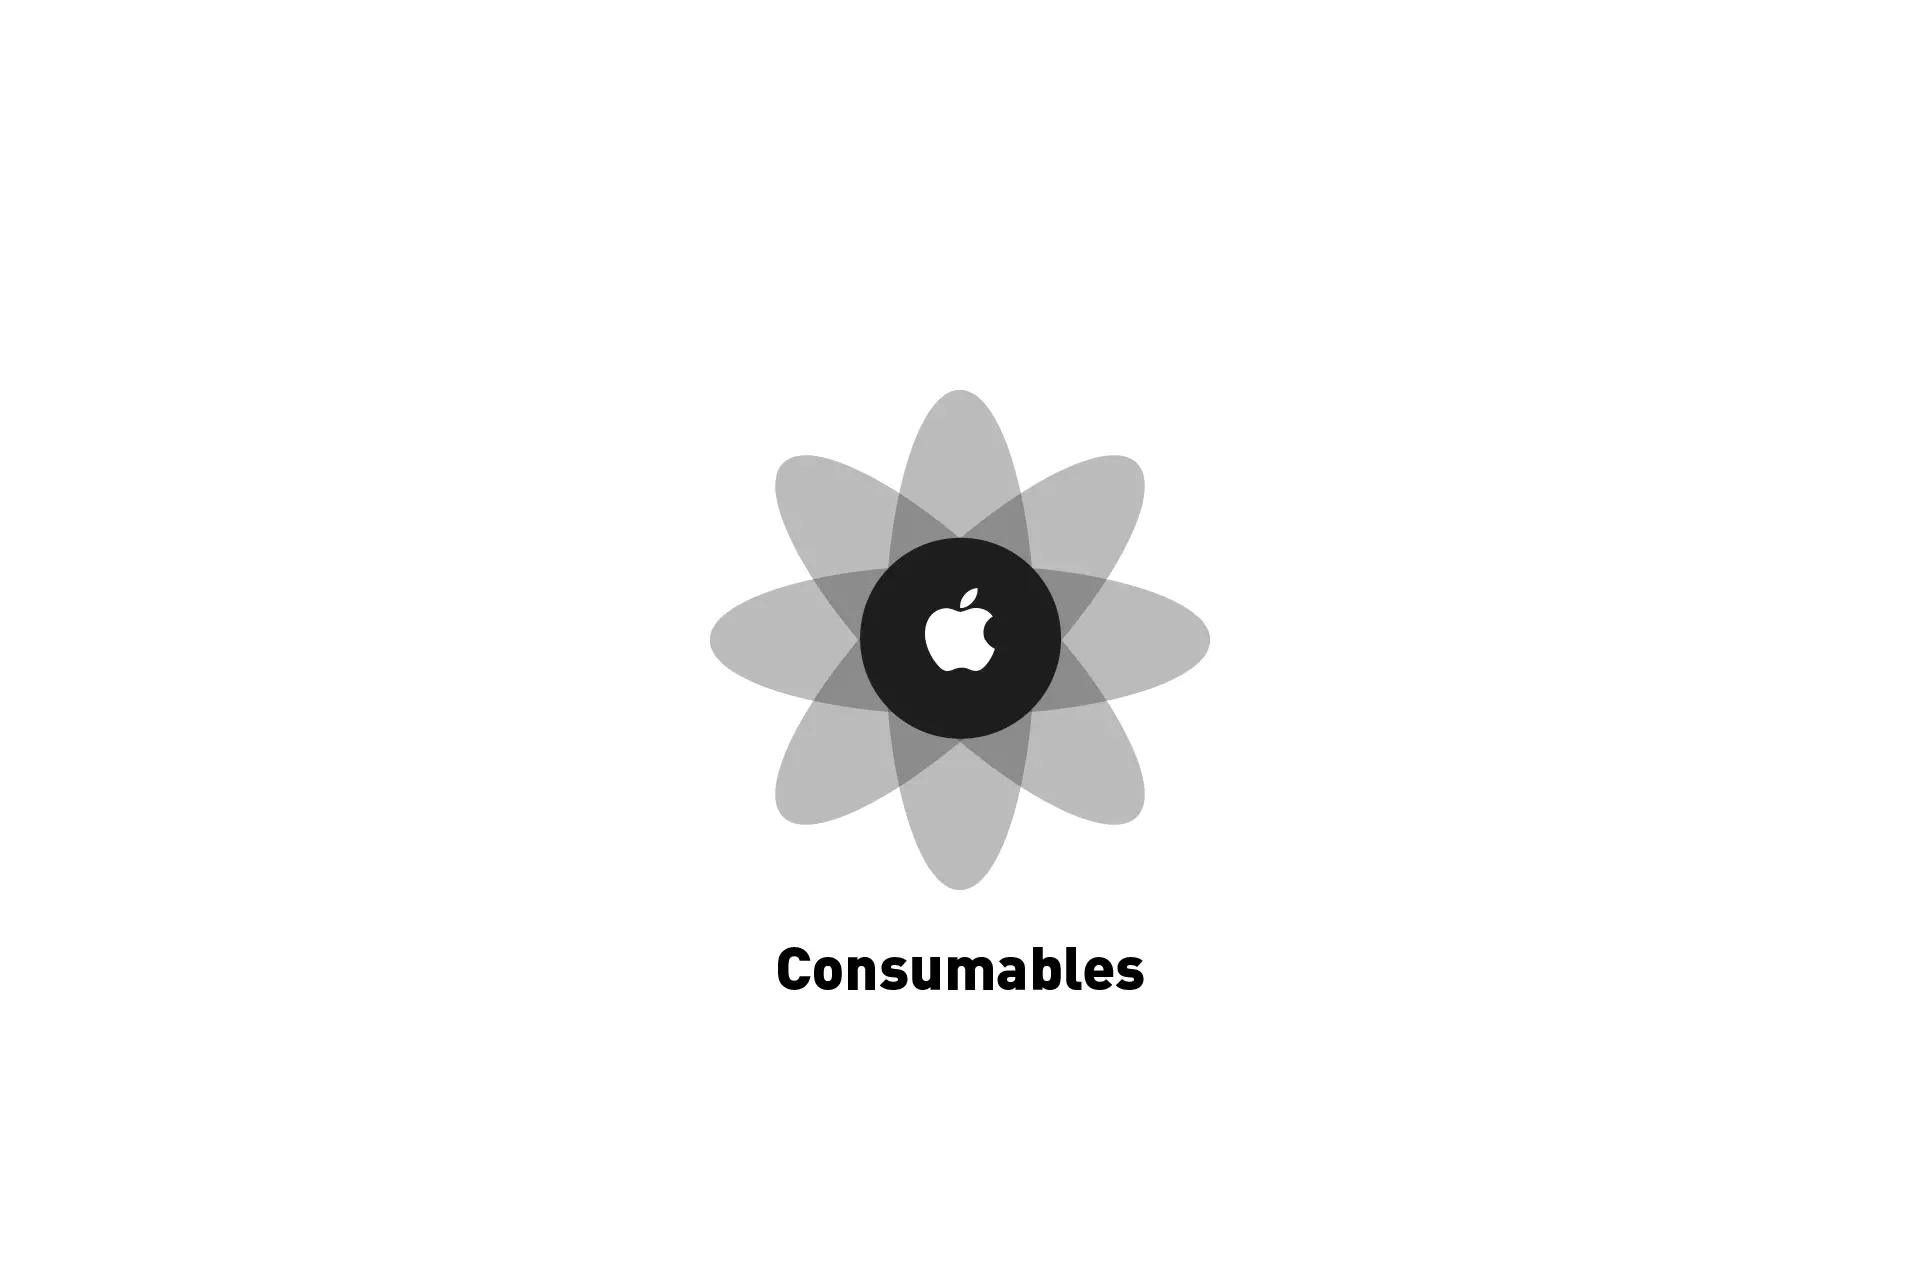 A flower that represents Apple with the text "Consumables" beneath it.